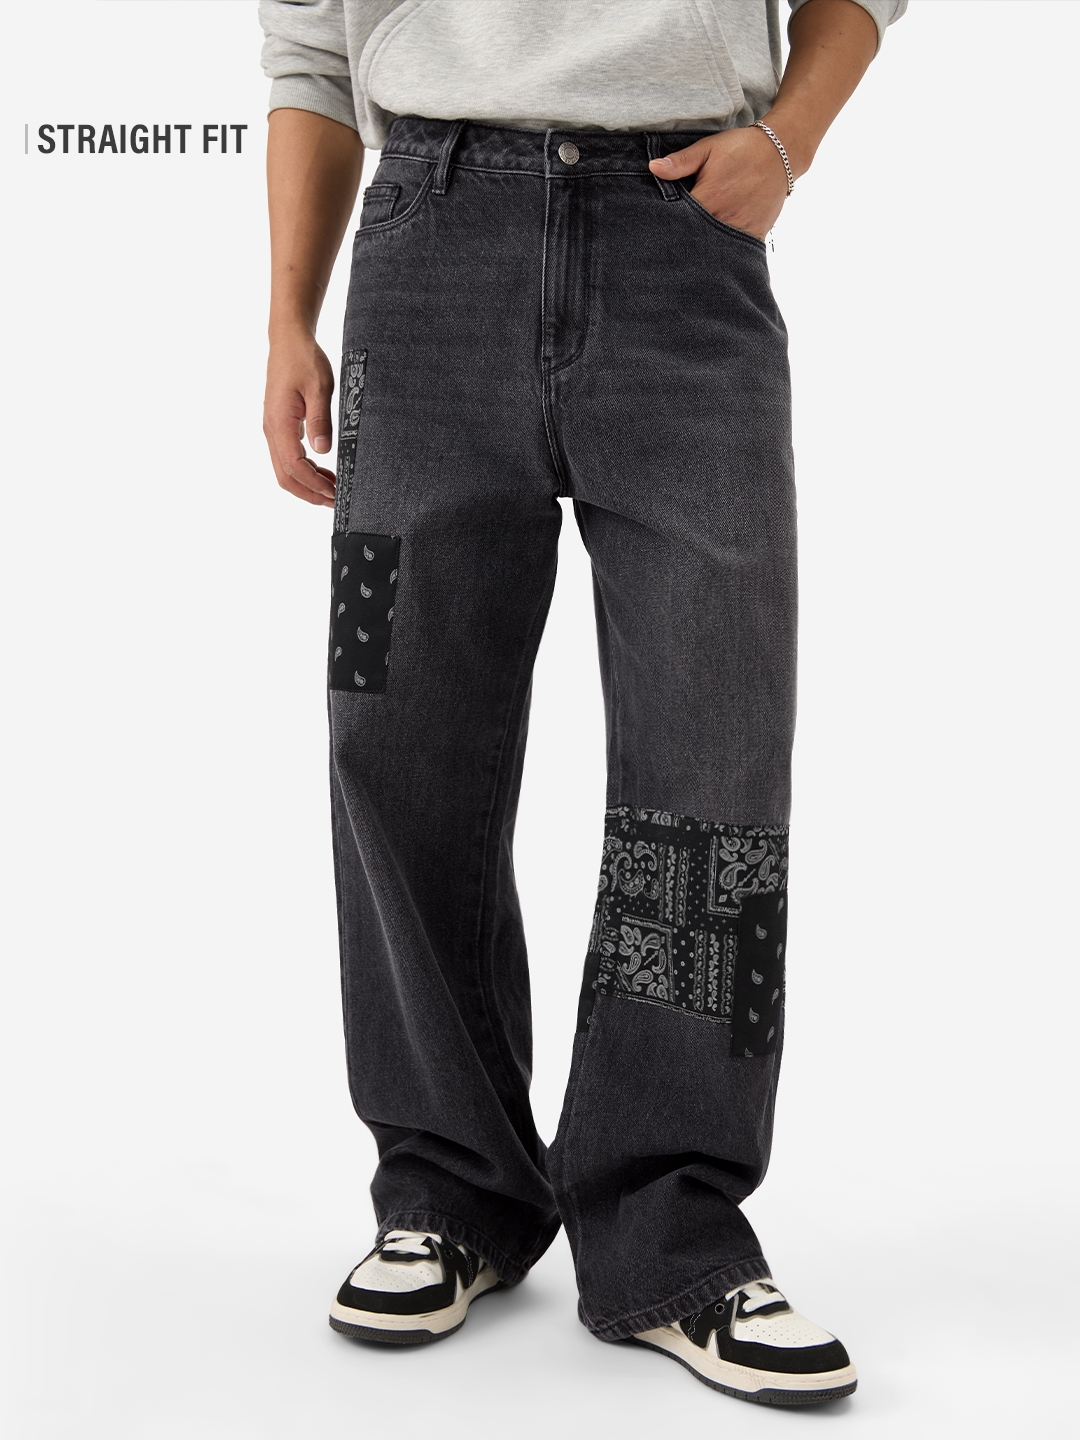 The Souled Store | Men's Denims Bandana Patches Jeans